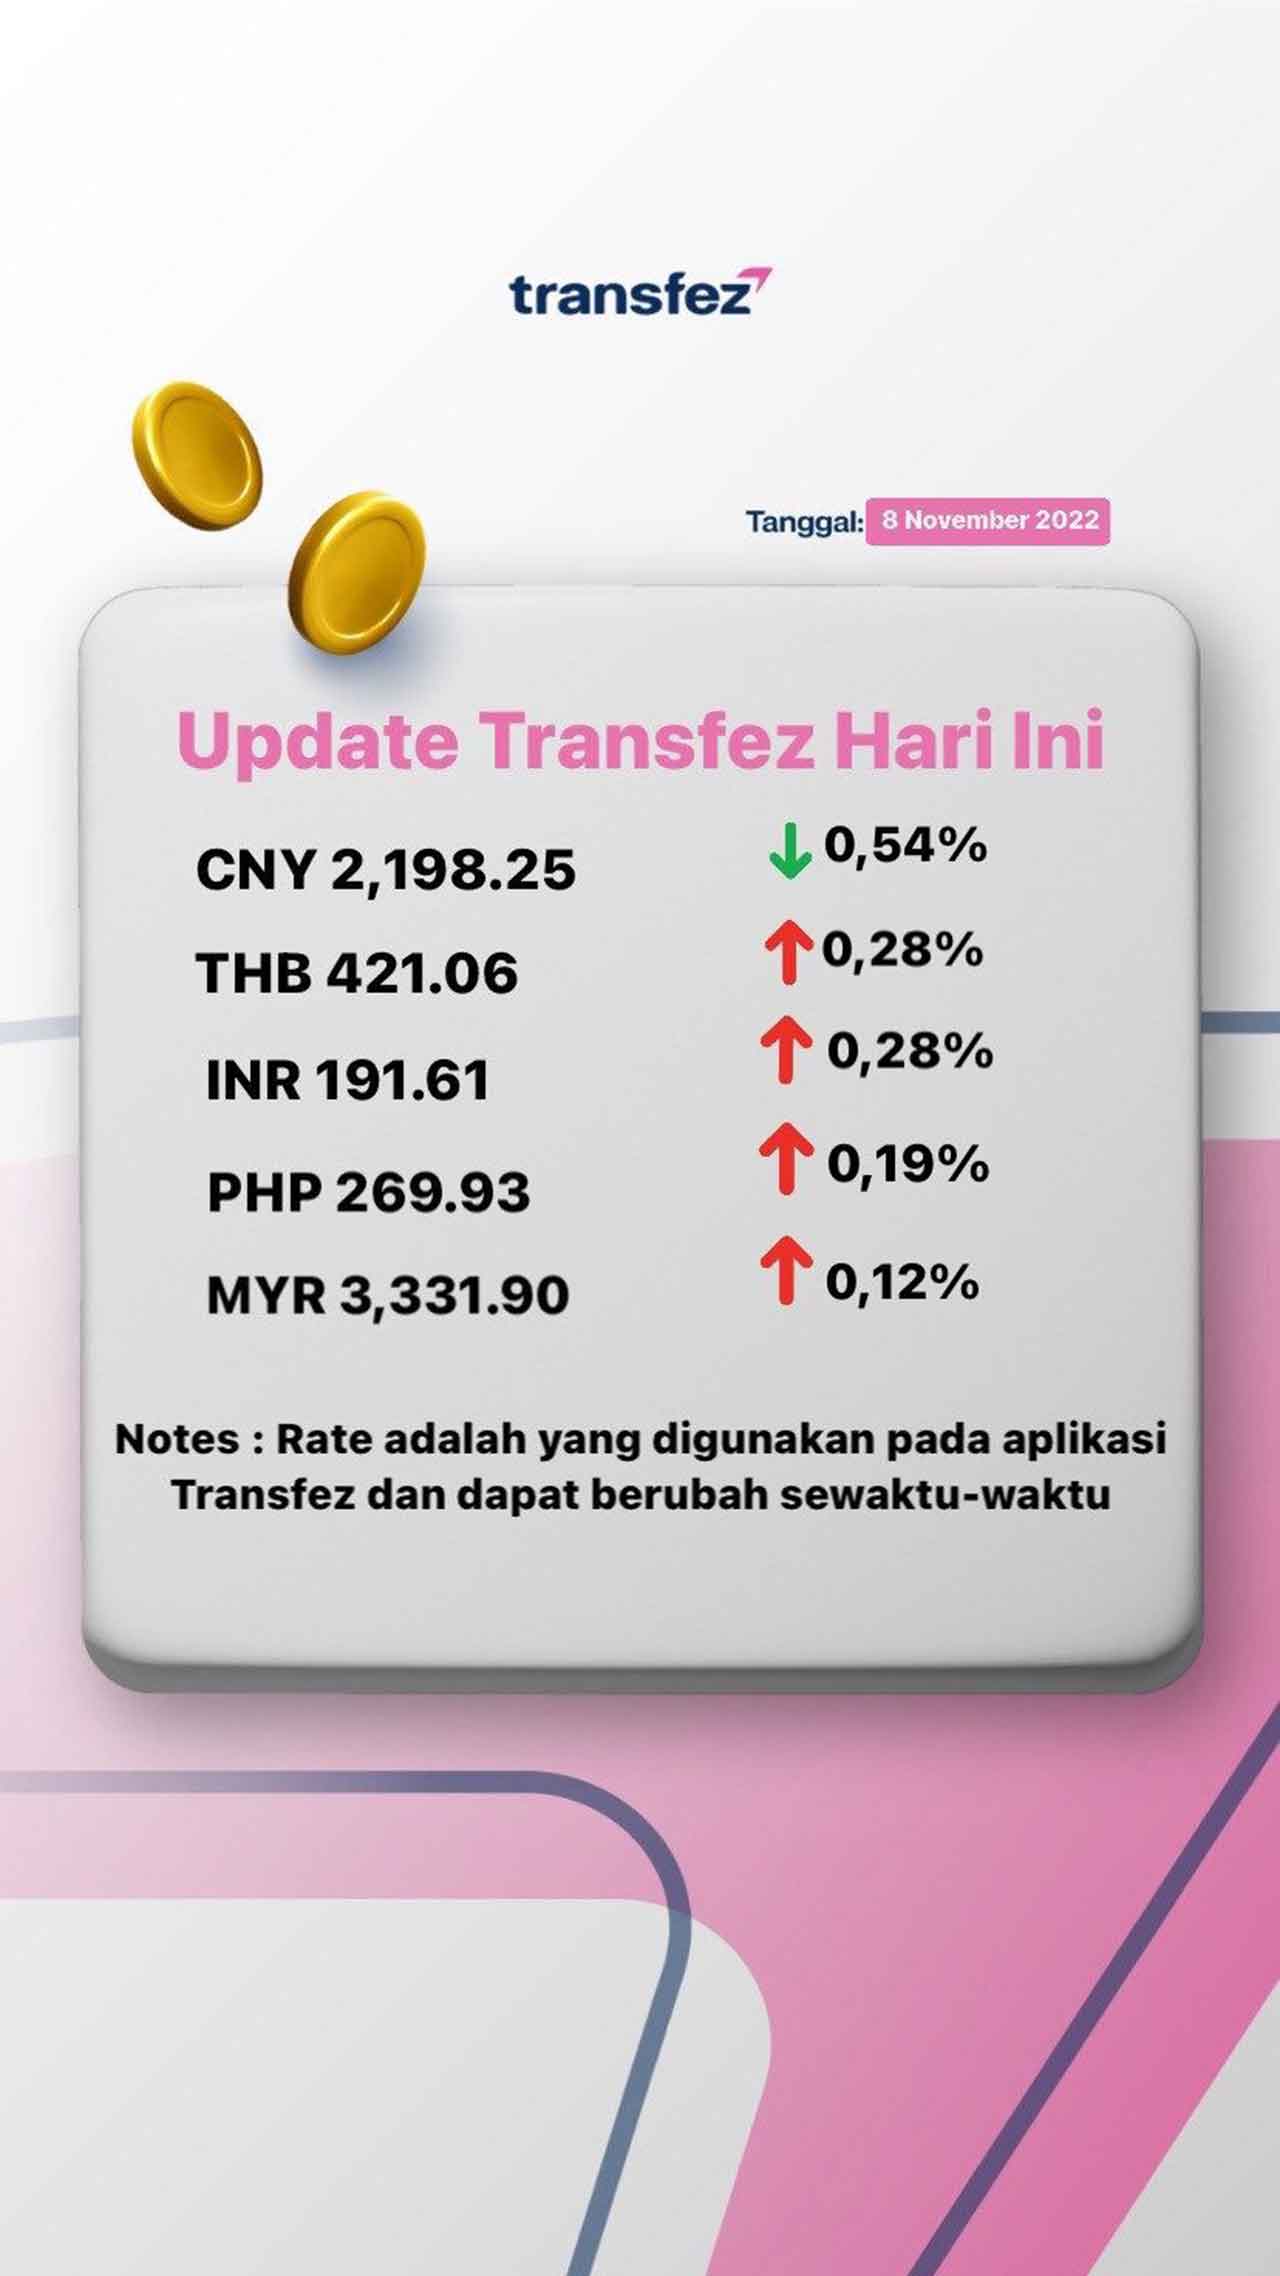 Today's Transfez Rate Update 08 November 2022